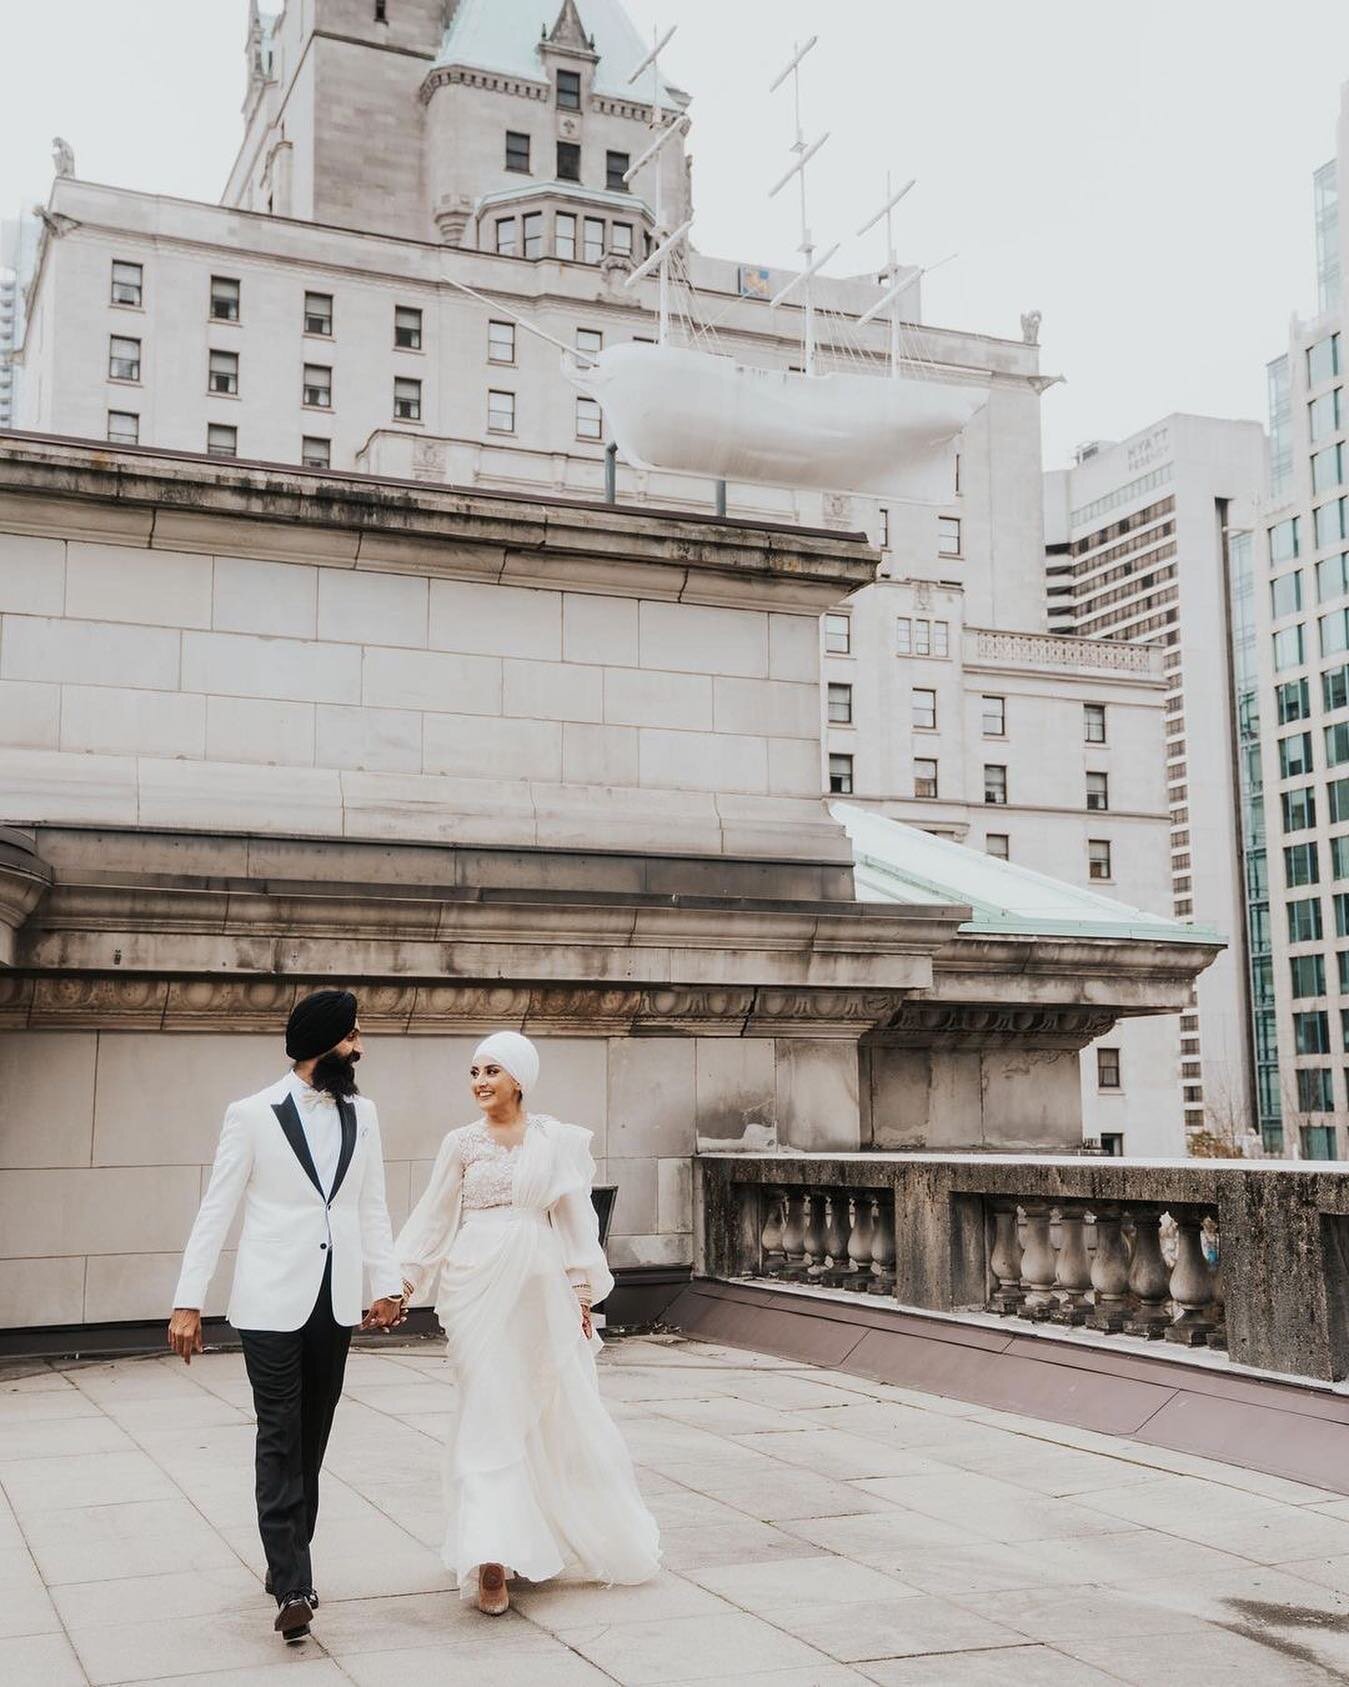 Forever in love with these stunning wedding portraits by @hongphotography 🤍

This shot is giving major New York City vibes! Can you guess where this was taken? 

Let us know your guess in the comments below! 

Peek the amazing team who made this day